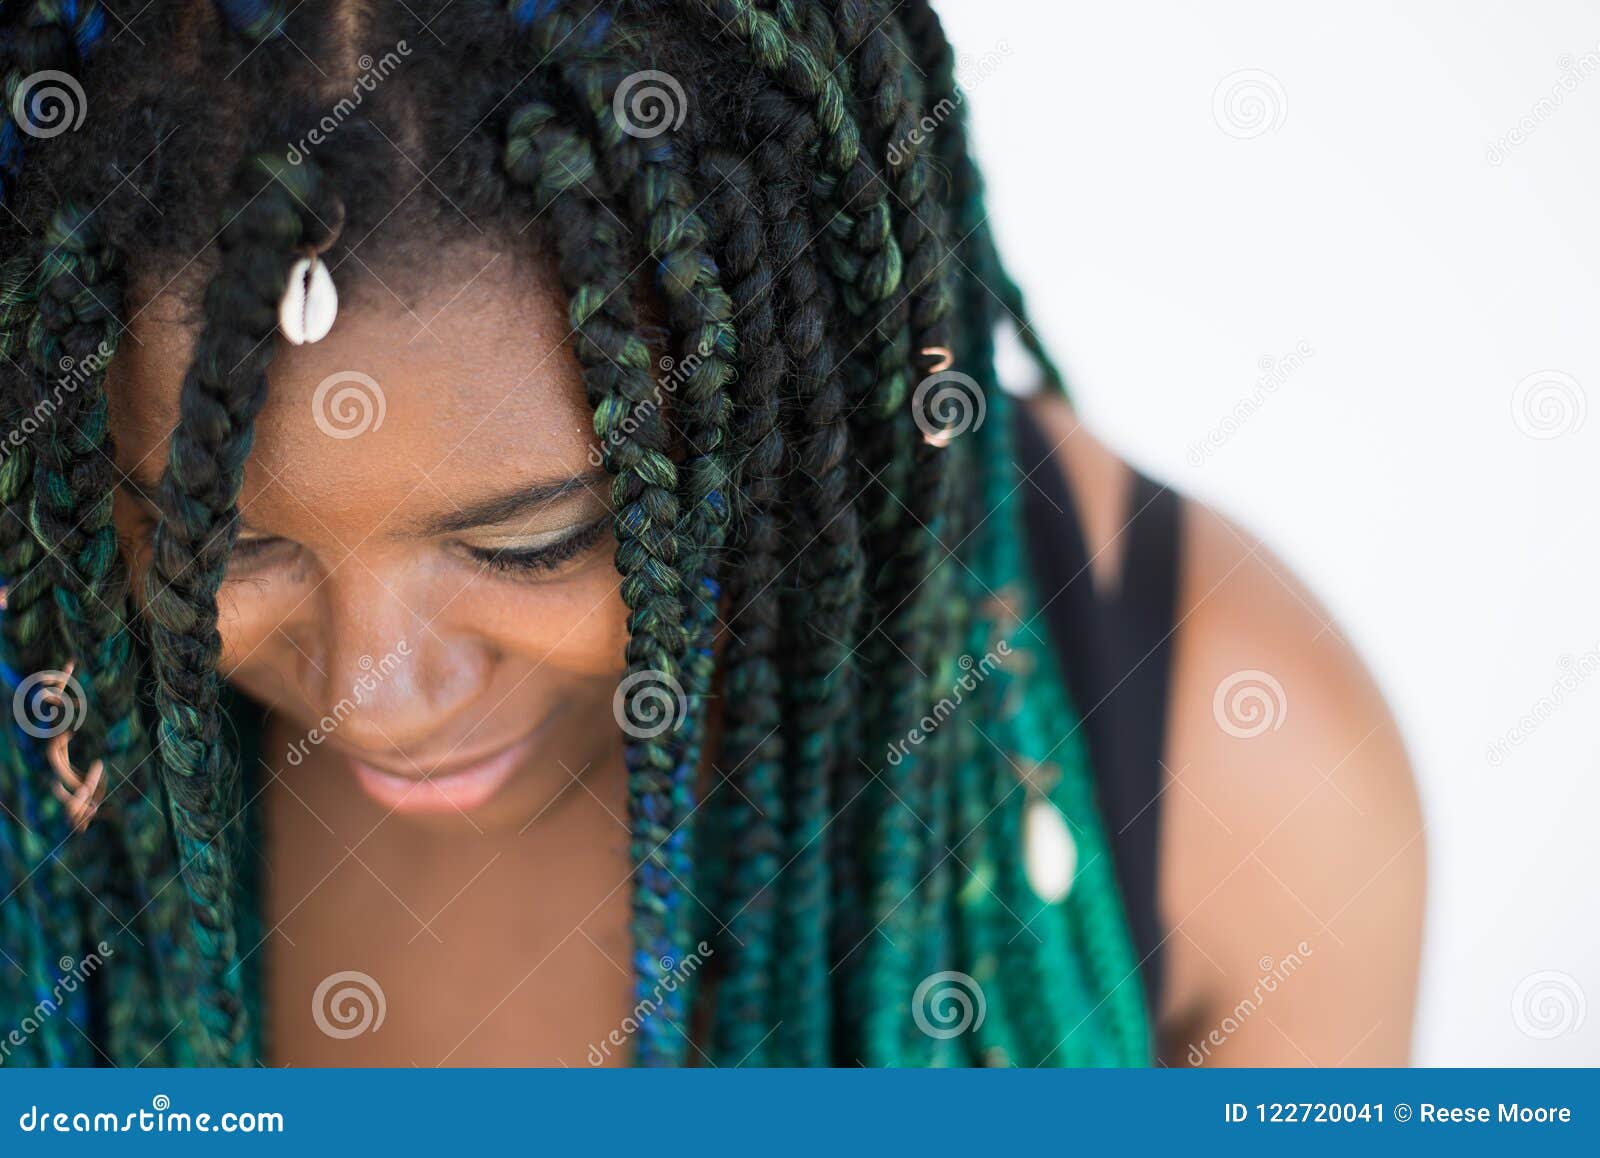 African American Woman With Beautiful Teal Green Blue Braids